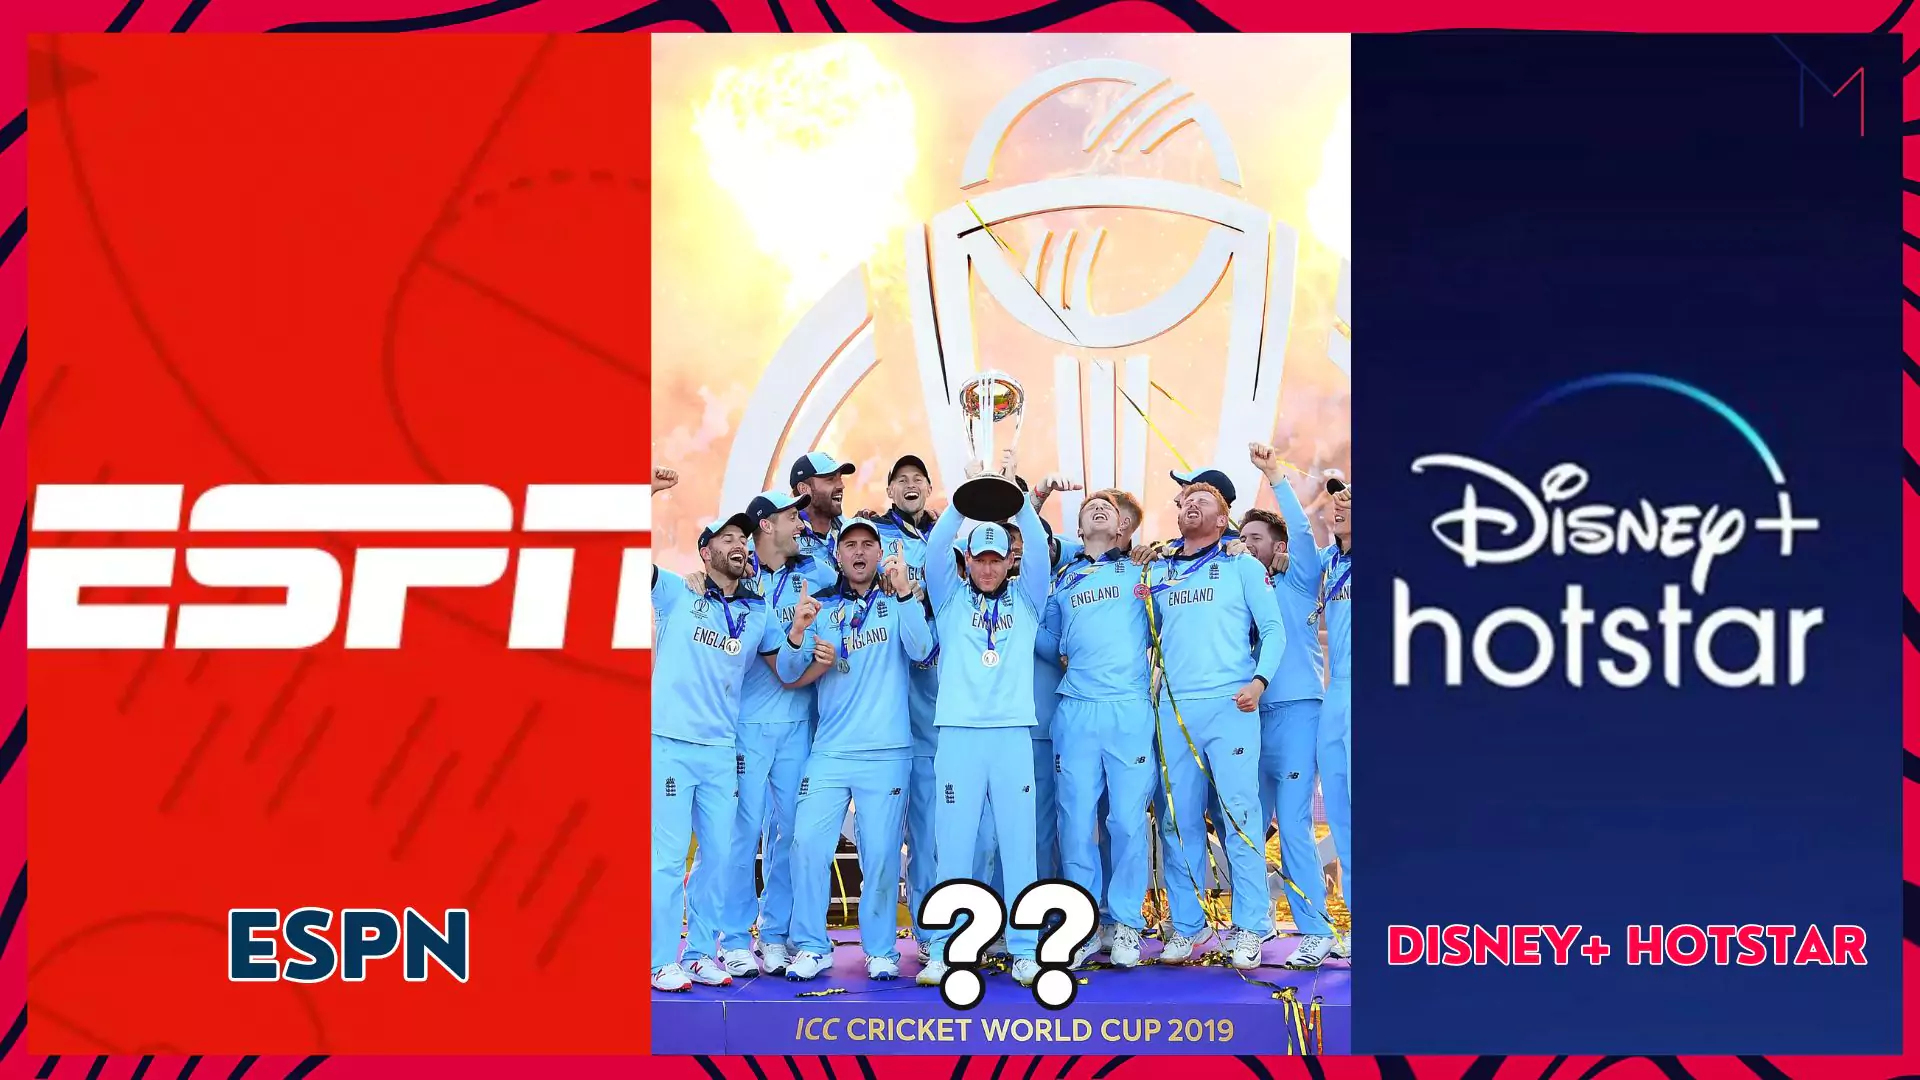 How to watch the Cricket World Cup in the Dominican Republic